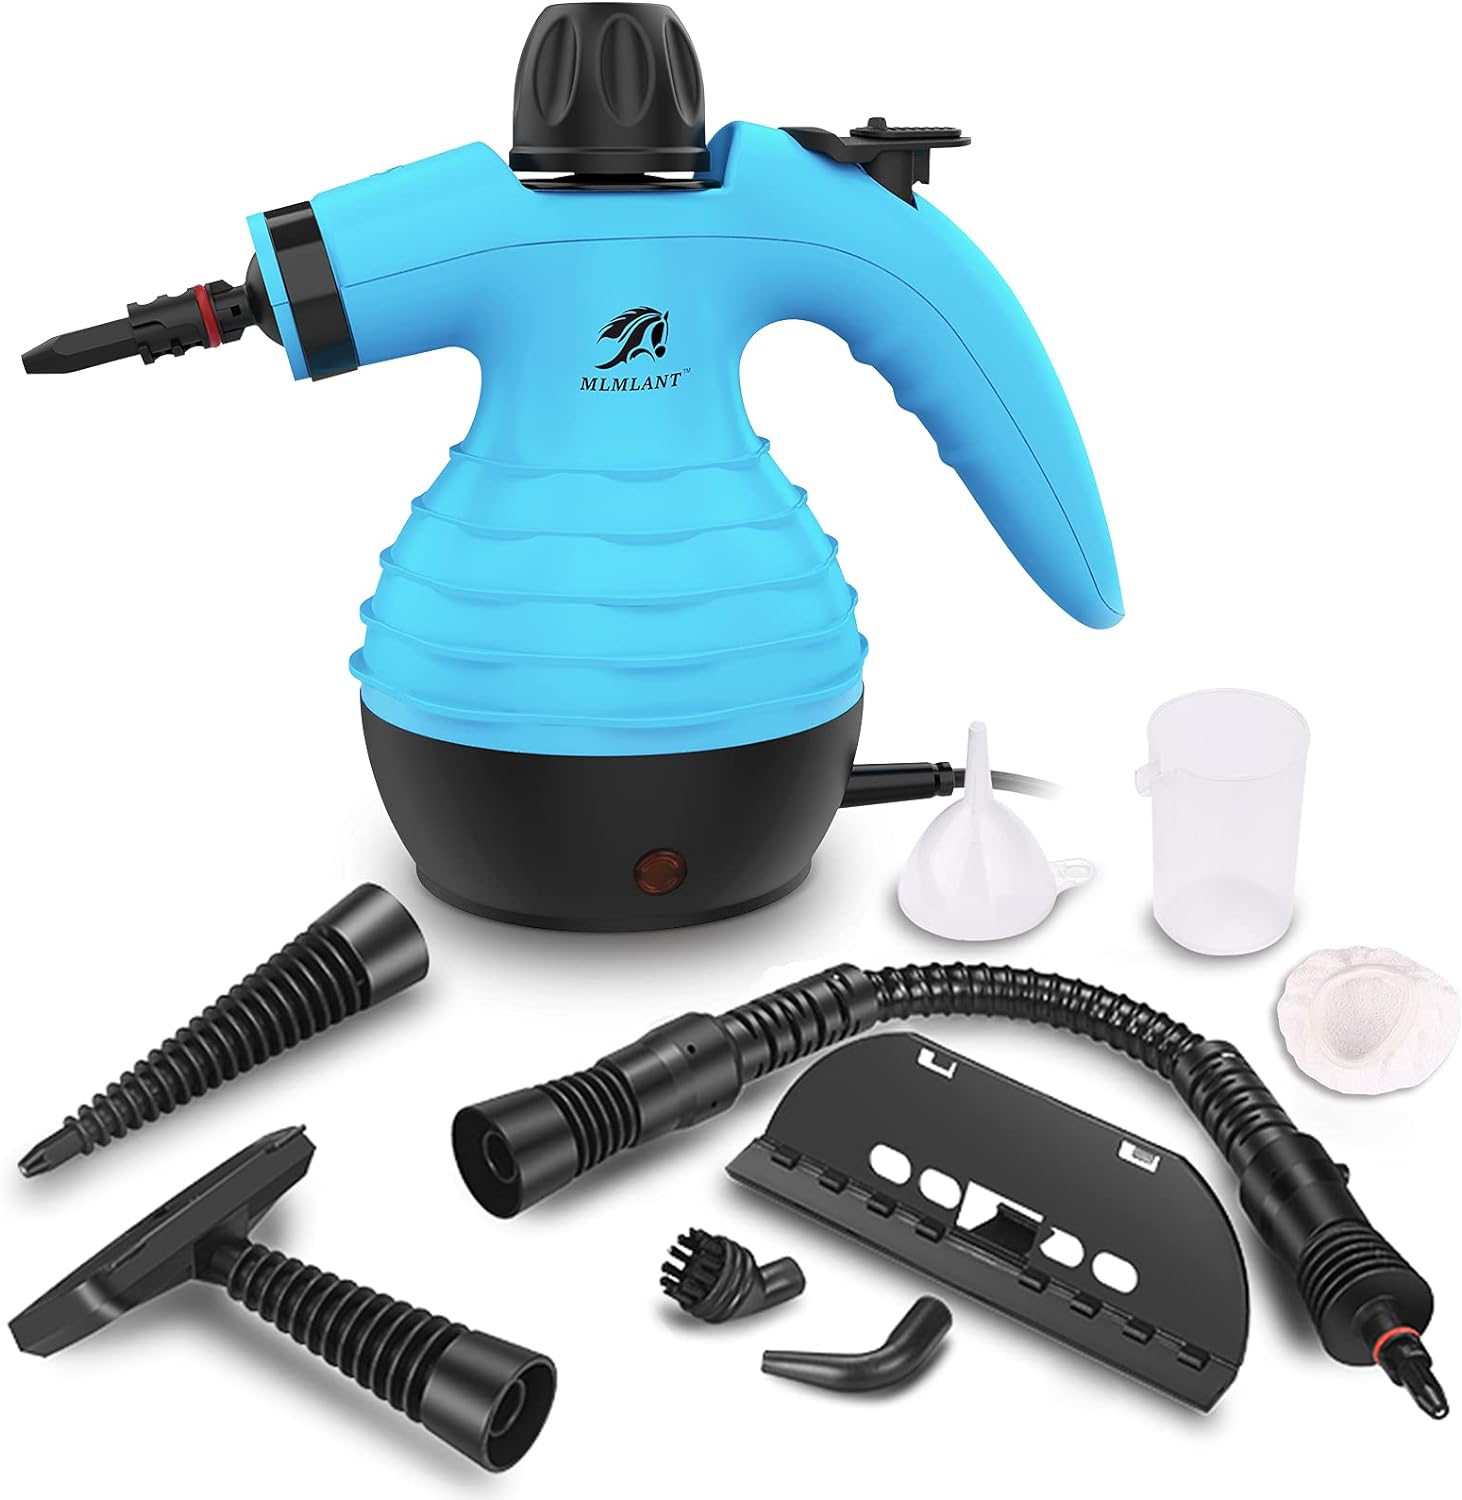 A blue handheld steamer is surrounded by accessories.